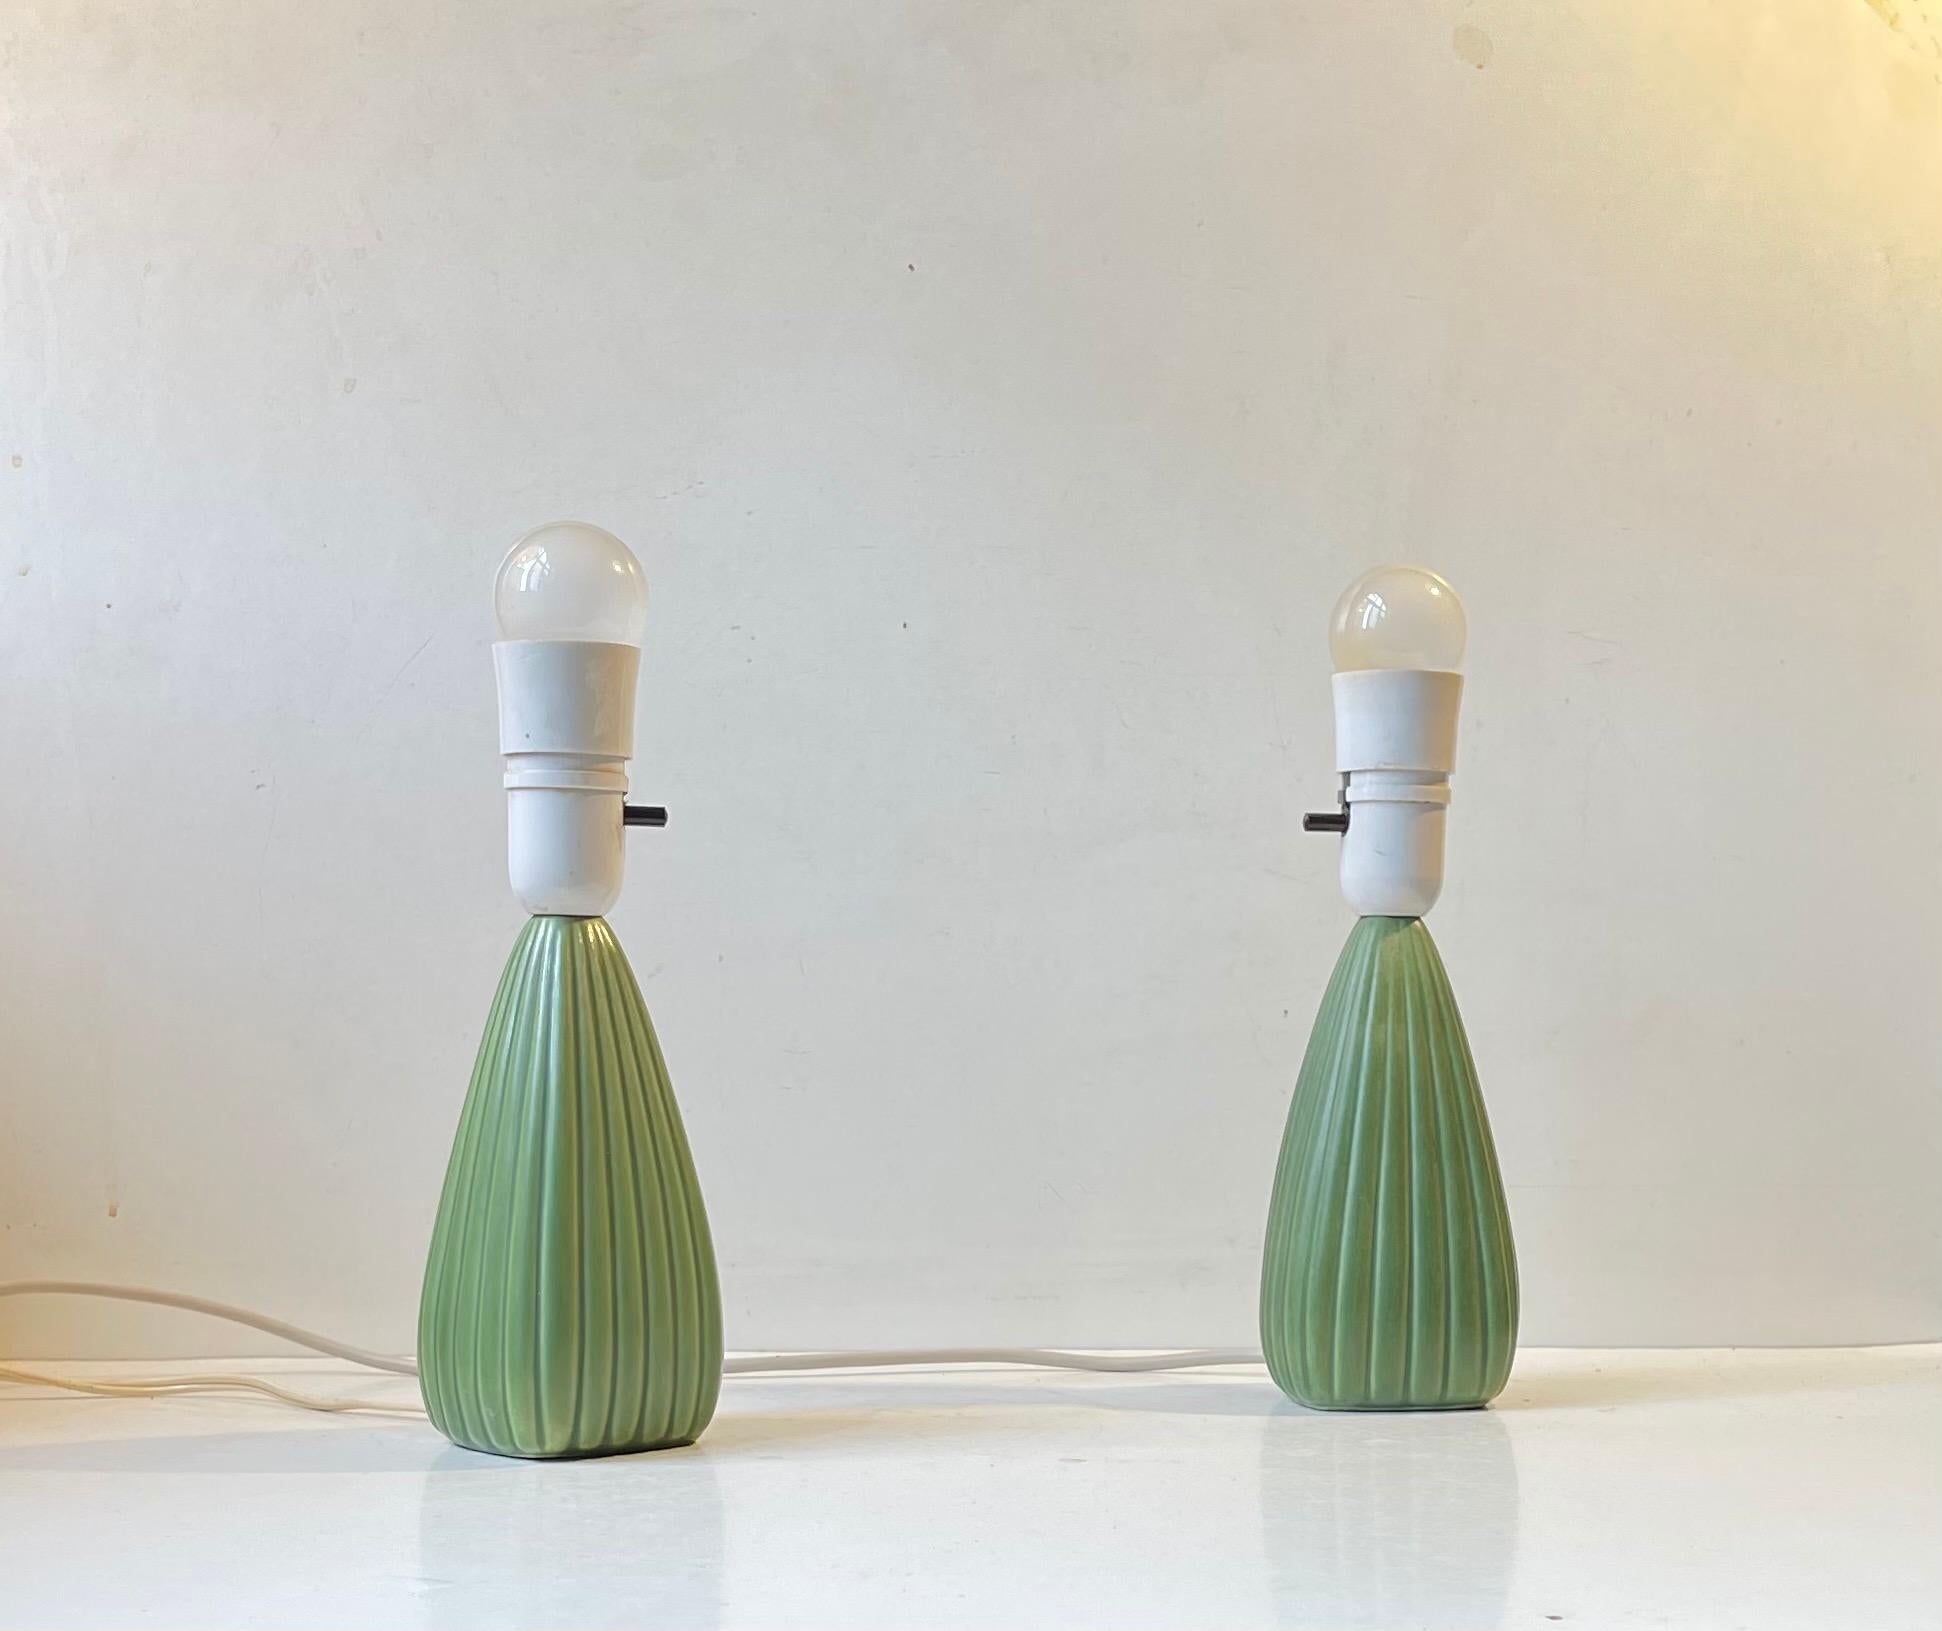 A pair of ceramic pumpkin table lamps featuring horizontal ribbings and light green glaze. Designed by Einar Johansen and manufactured by Søholm in Denmark in early 1970s. The style is reminiscent of Arne Bang and Eslau in particular. The white